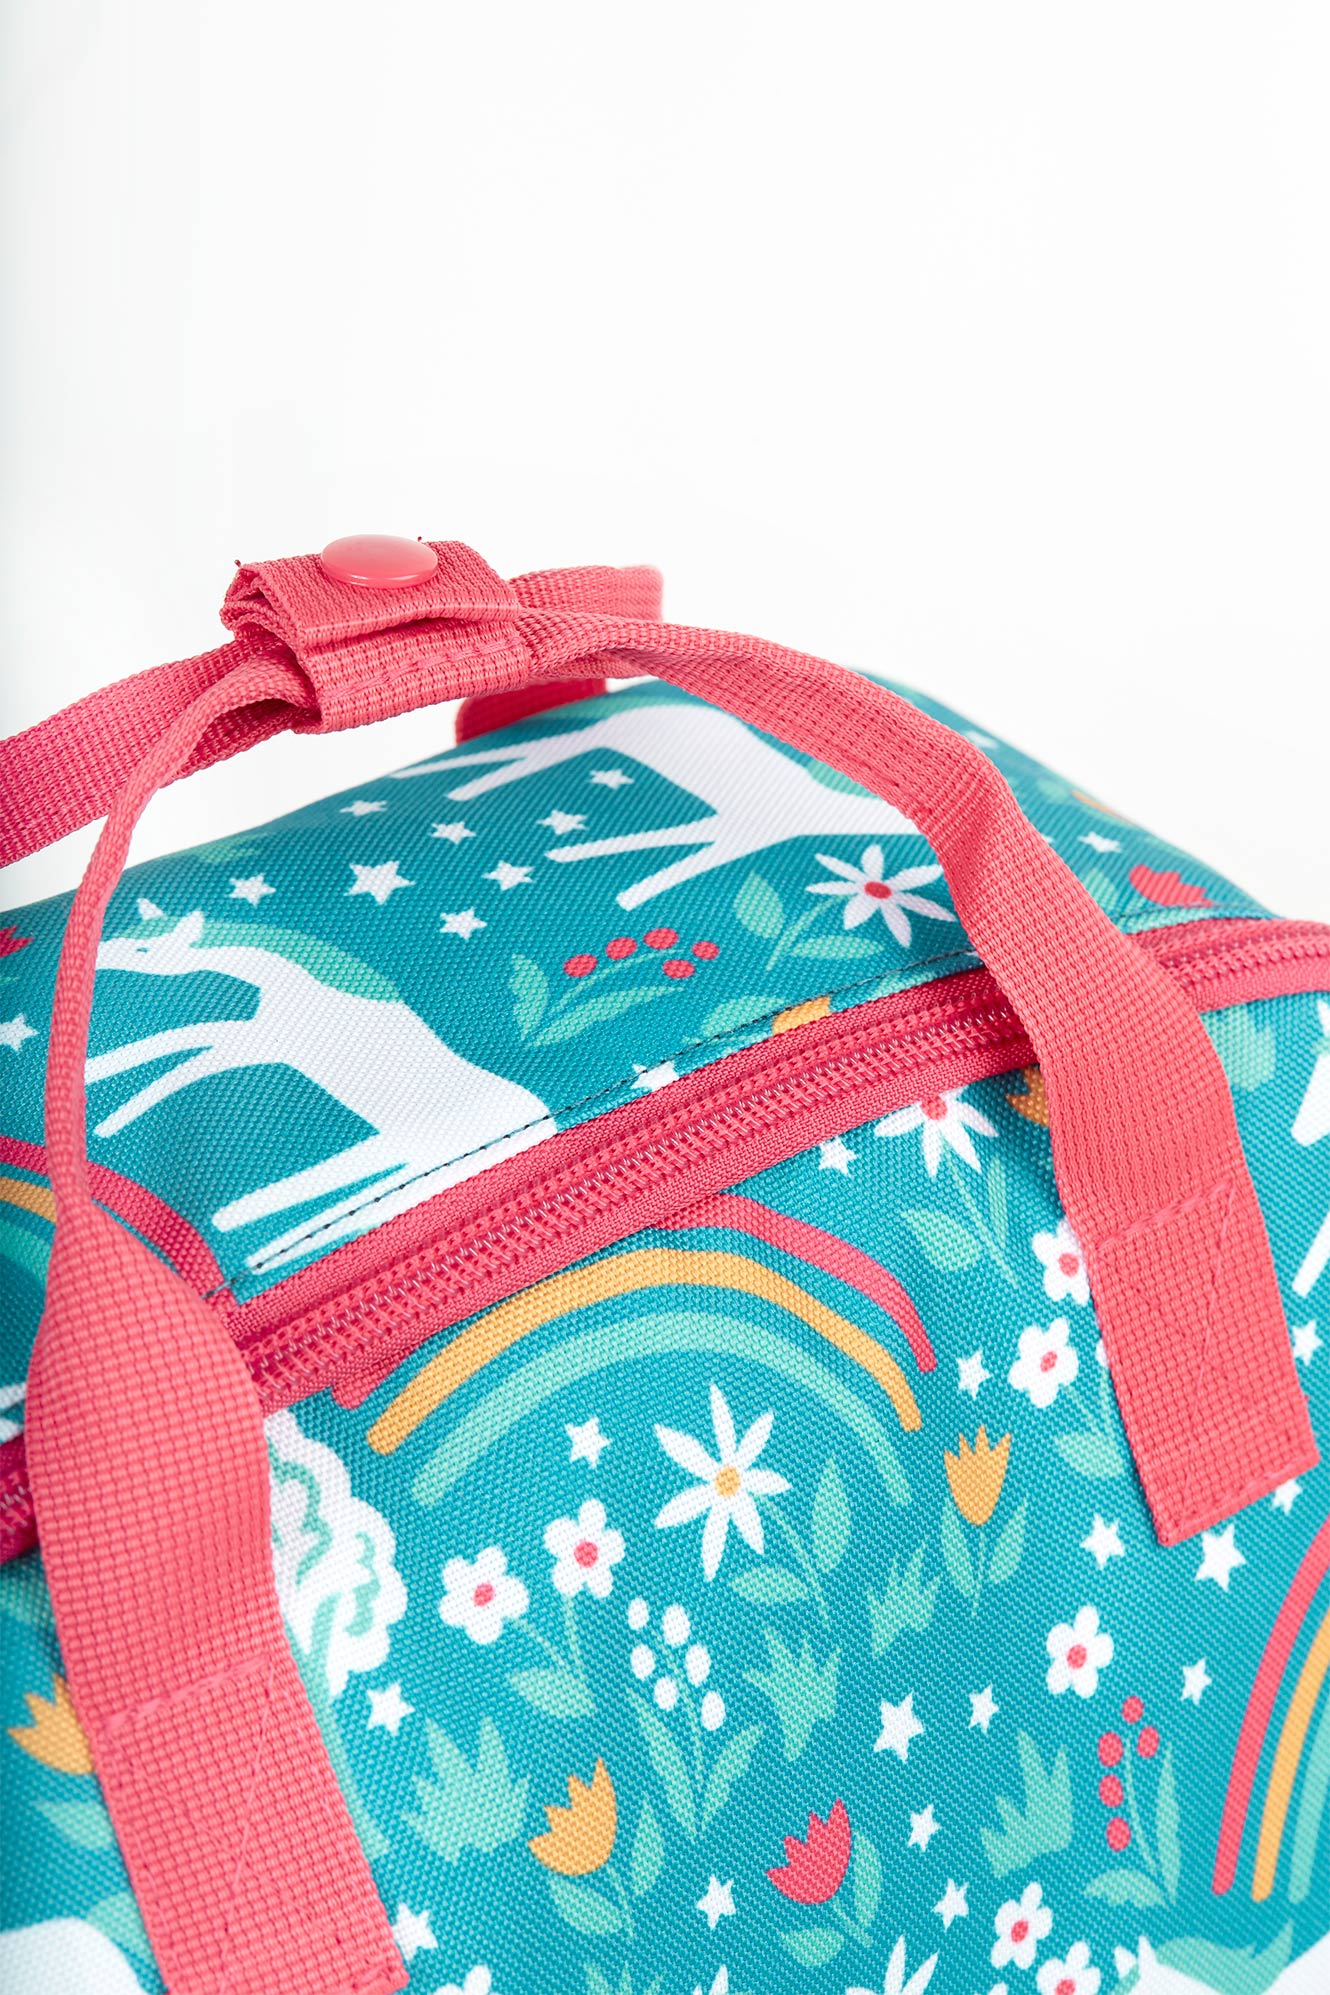 Frugi Explorers Backpack - Wild Horses-Kids-Ohh! By Gum - Shop Sustainable